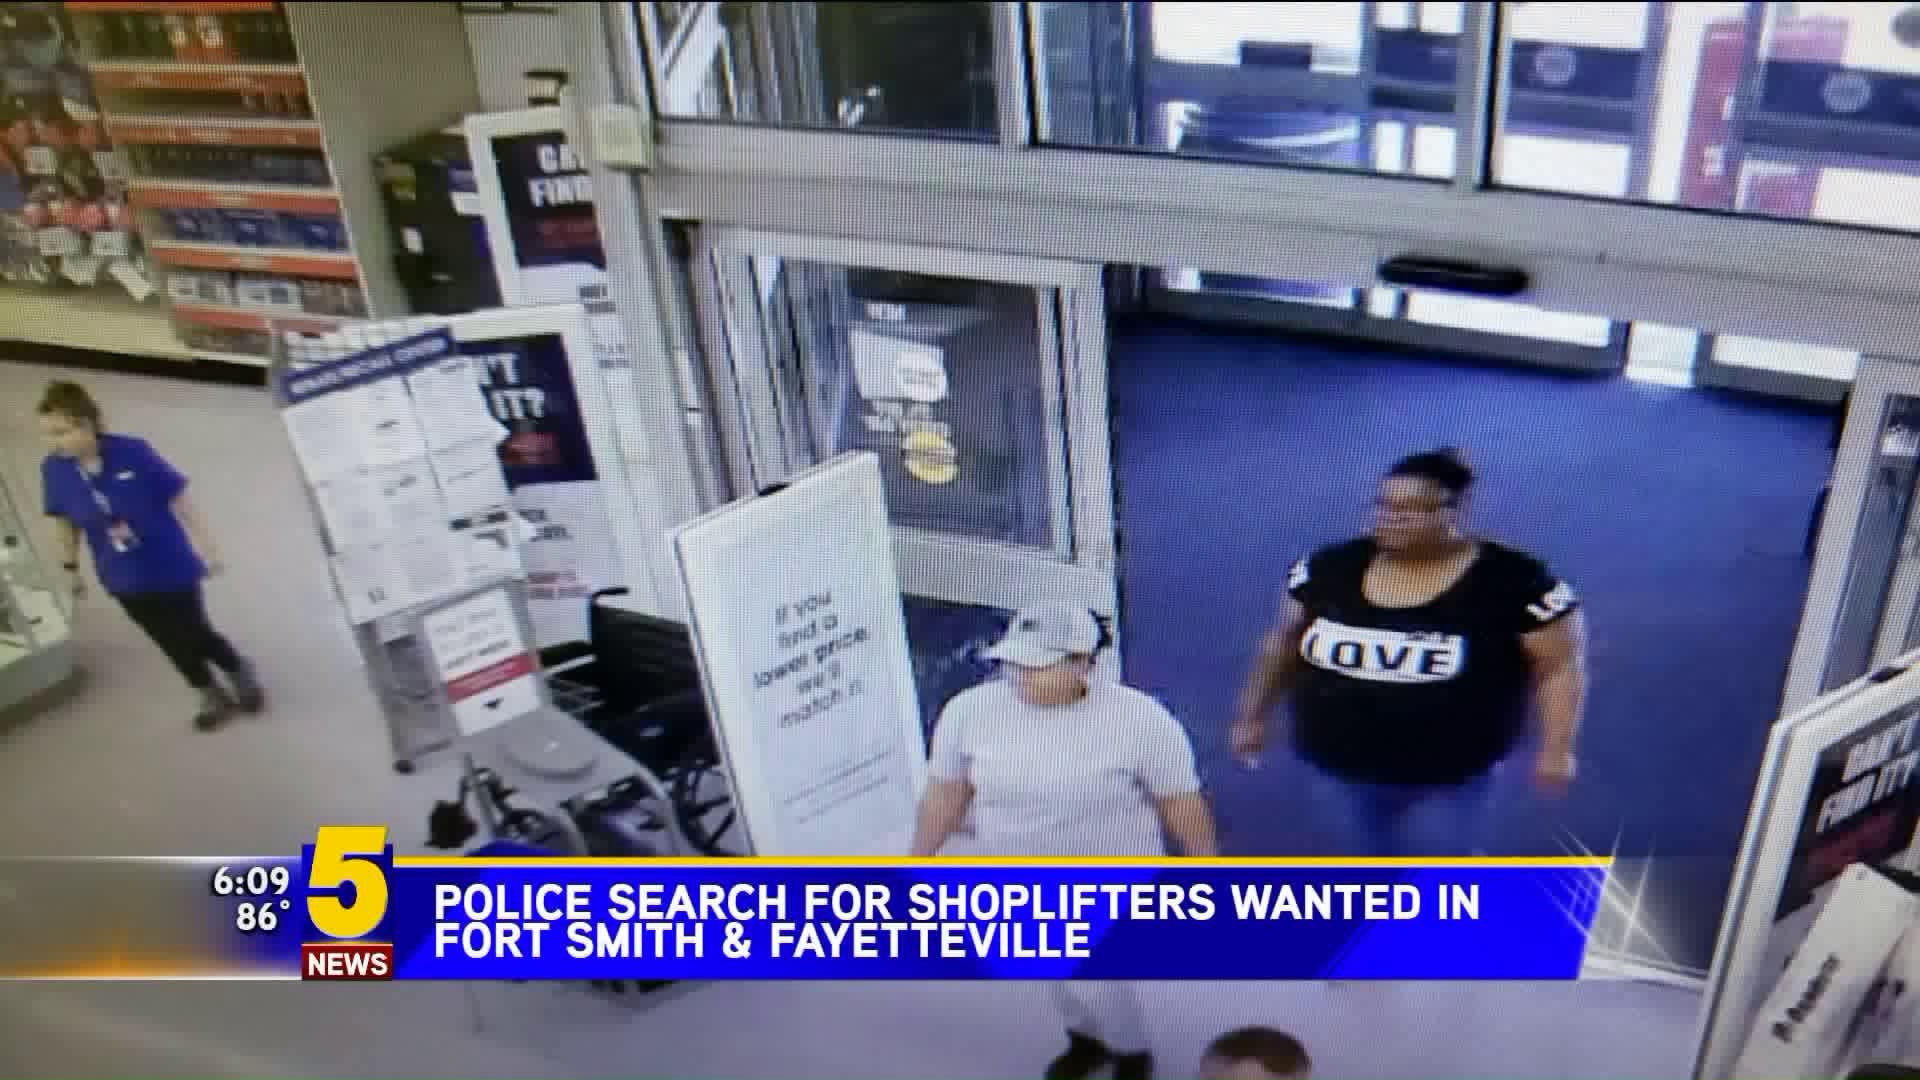 Police Searching For Shoplifters Wanted In Fort Smith & Fayetteville